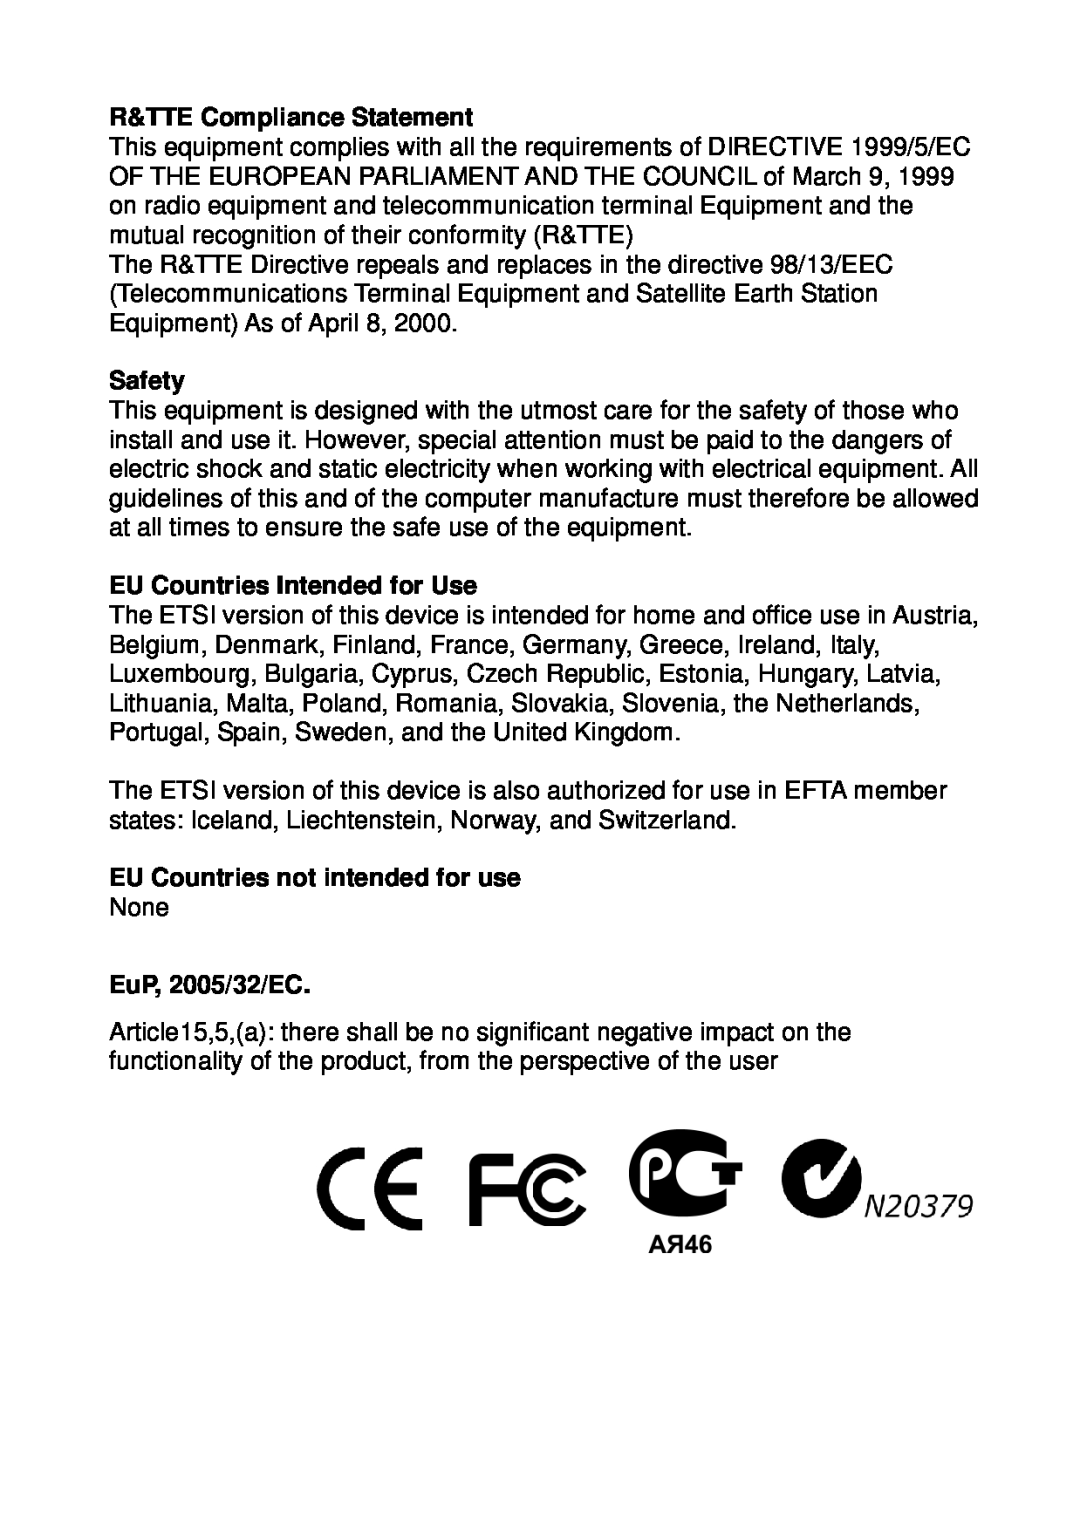 Edimax Technology IC-9000 manual R&TTE Compliance Statement, Safety, EU Countries Intended for Use, EuP, 2005/32/EC 